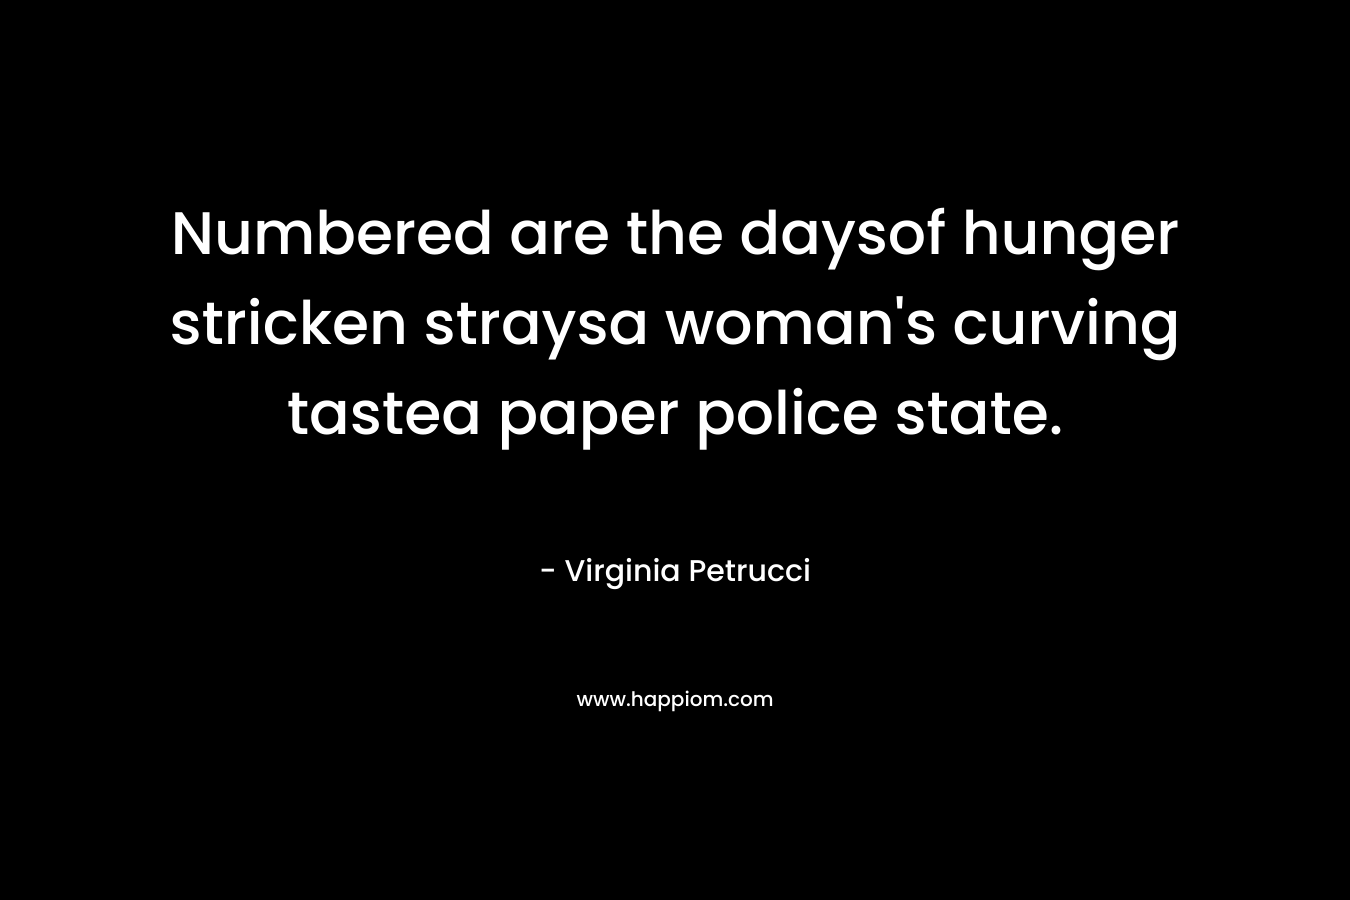 Numbered are the daysof hunger stricken straysa woman's curving tastea paper police state.